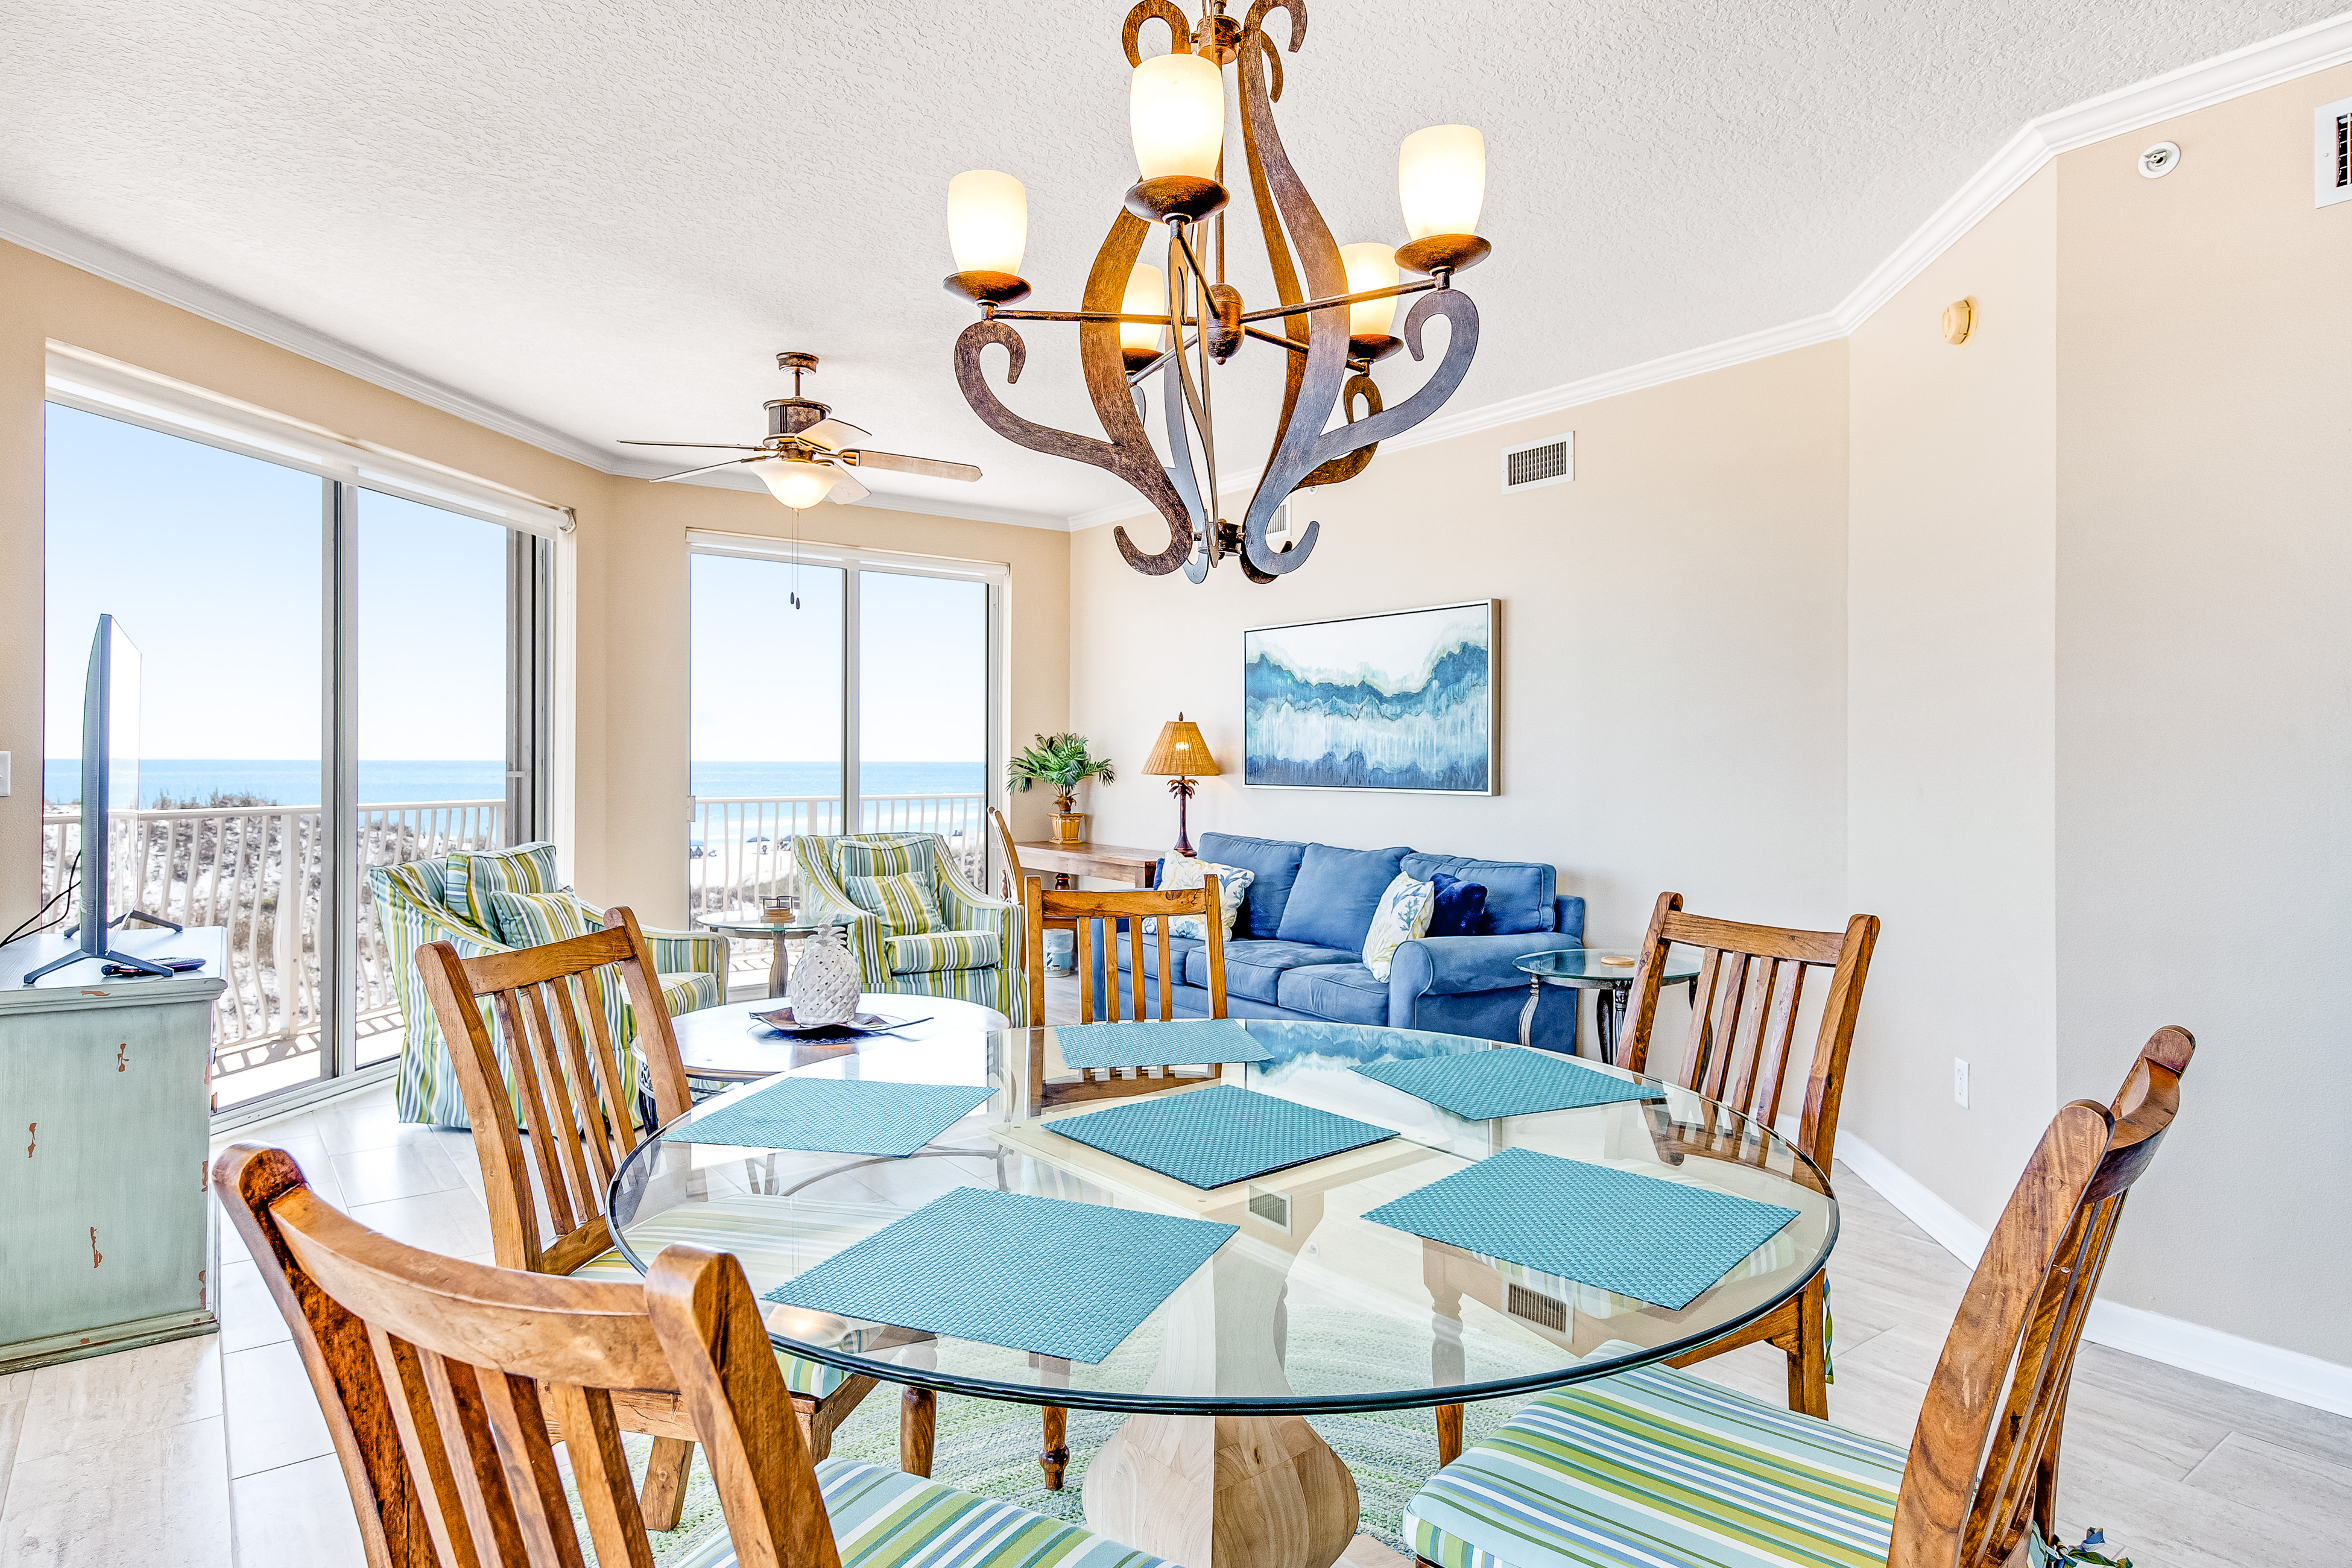 Dunes of Seagrove A210 Condo rental in Dunes of Seagrove in Highway 30-A Florida - #9